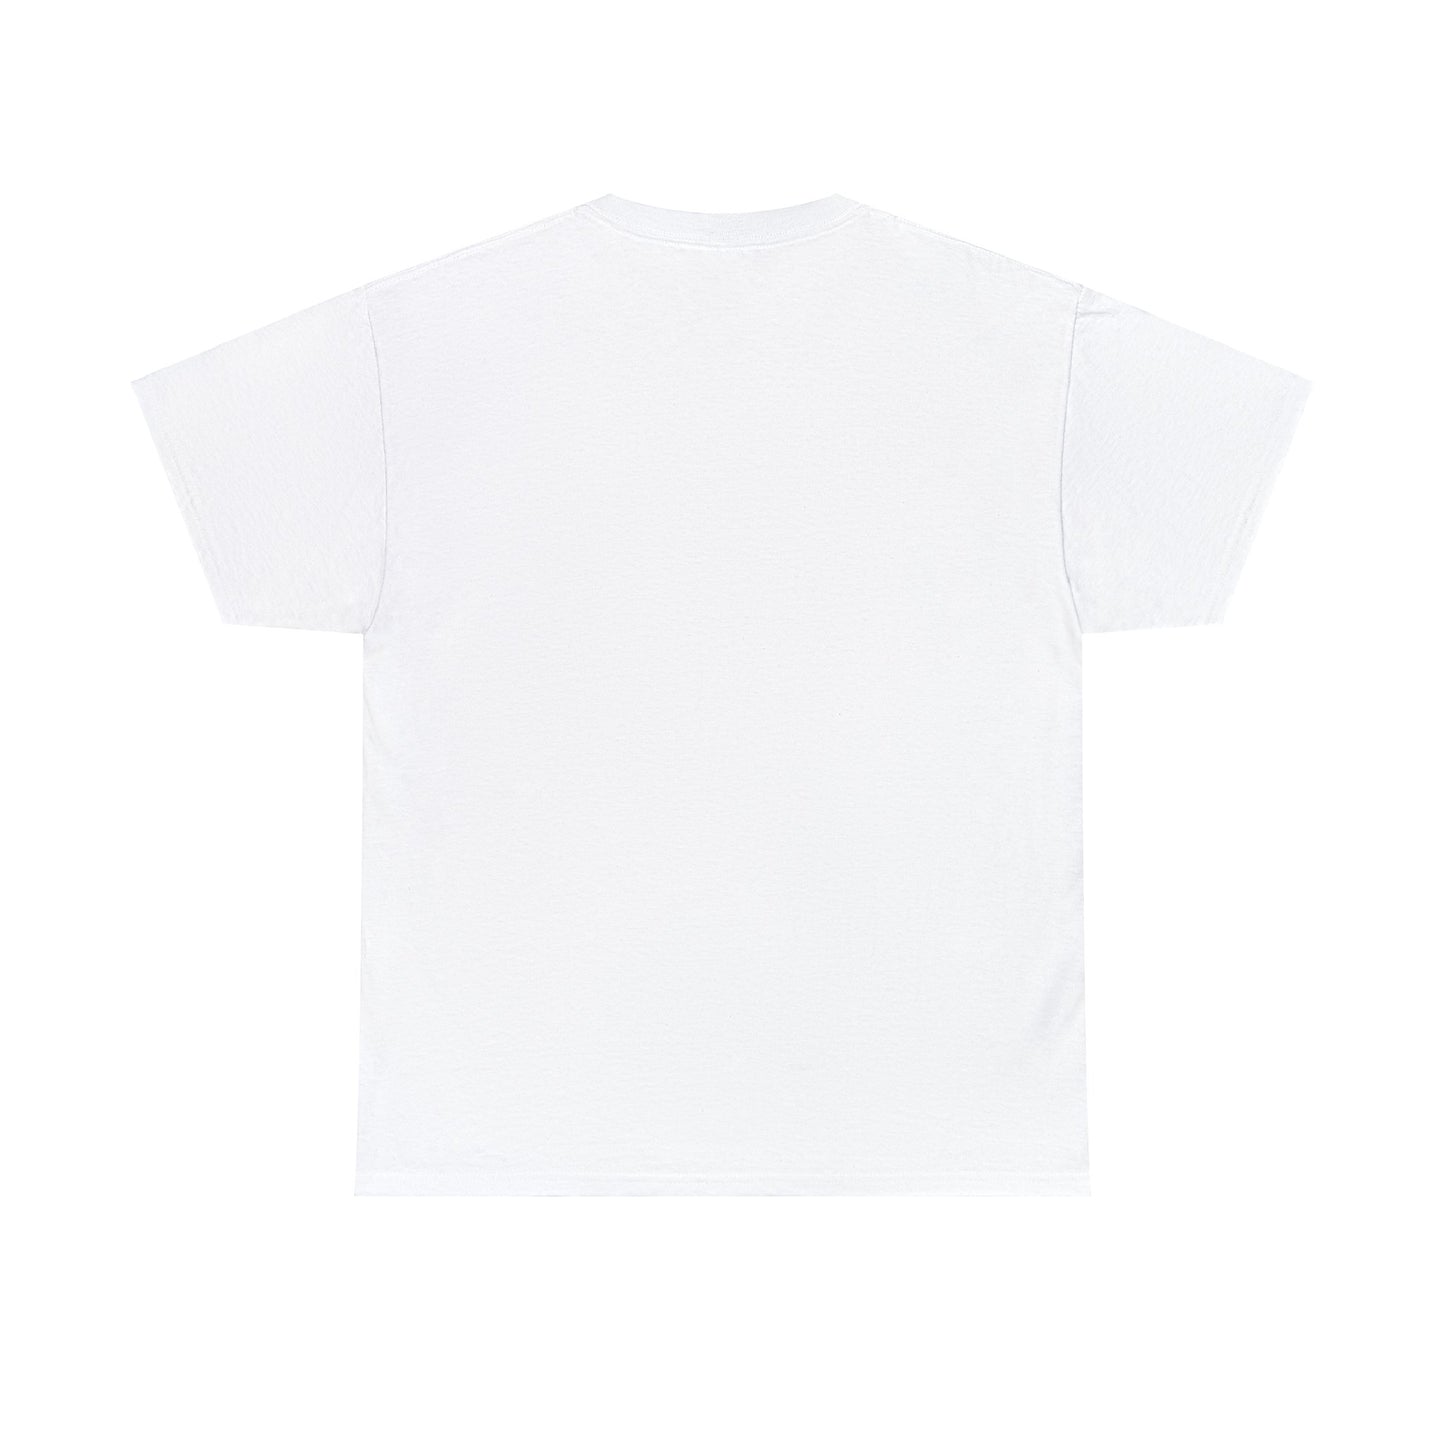 White Graphic Tees | Heavy Cotton Tees | Japanese Anime World